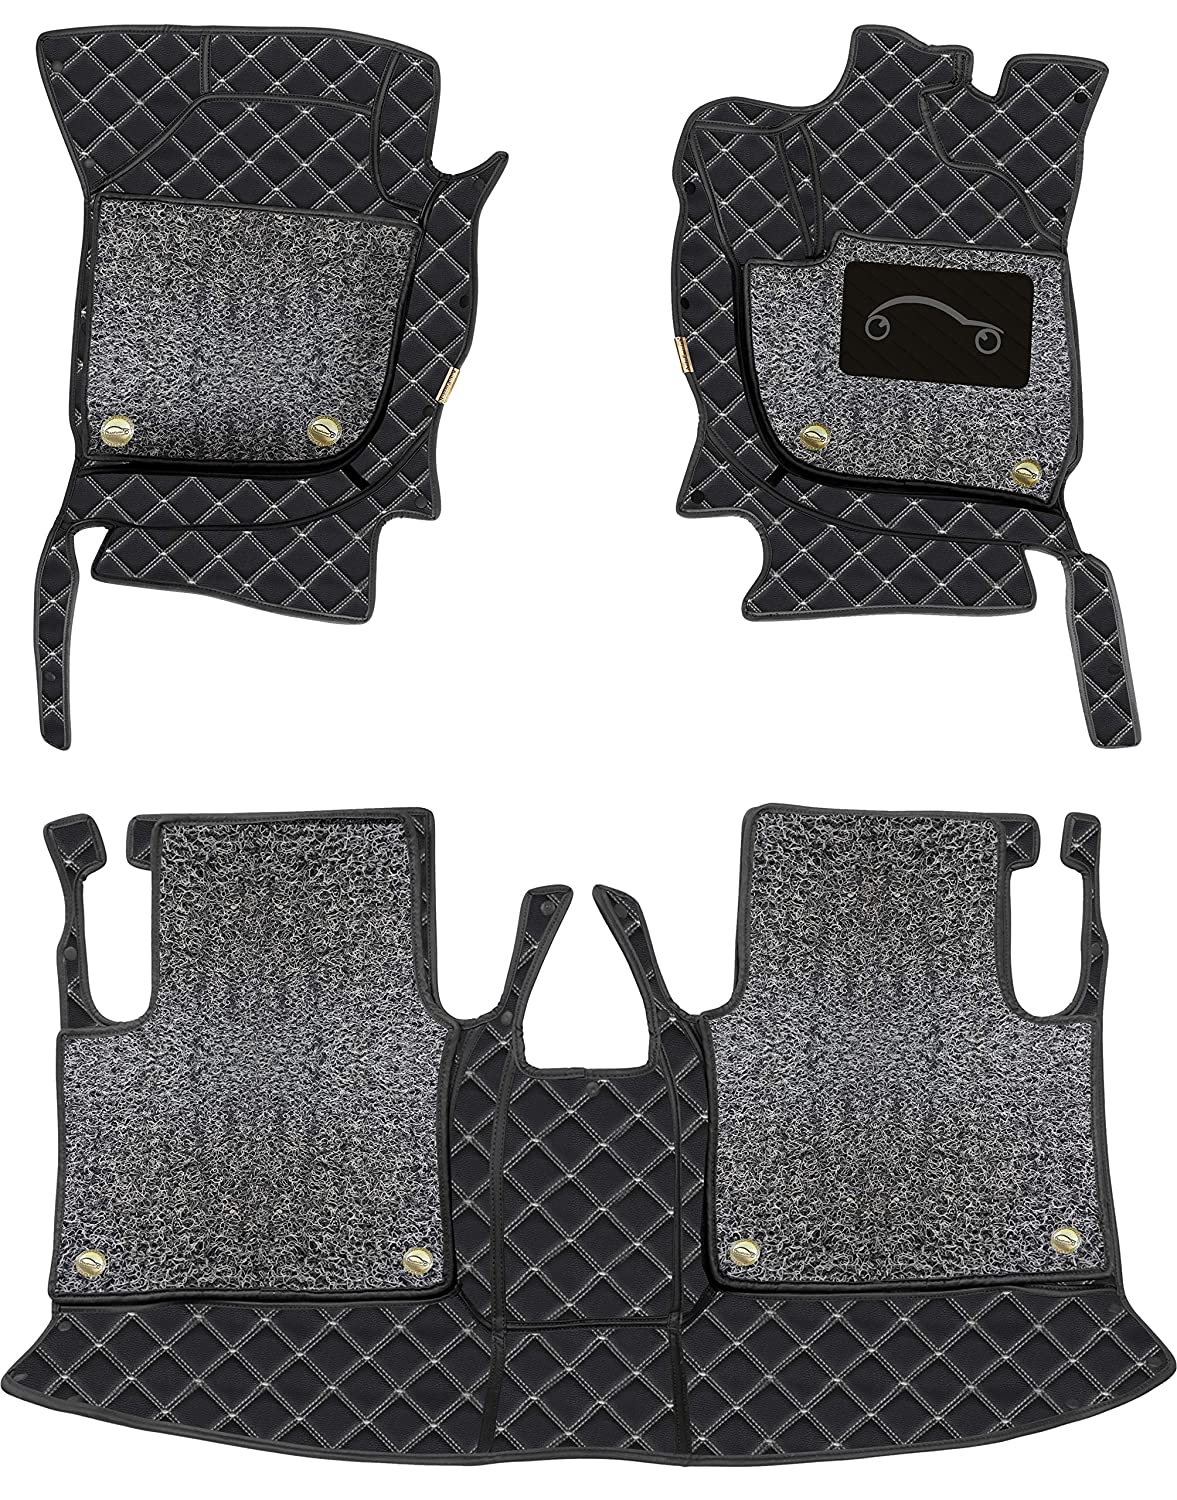 Mercedes S350 2009-13 7D Luxury Car Mat, All Weather Proof, Anti-Skid, 100% Waterproof & Odorless with Unique Diamond Fish Design (24mm Luxury PU Leather, 2 Rows)